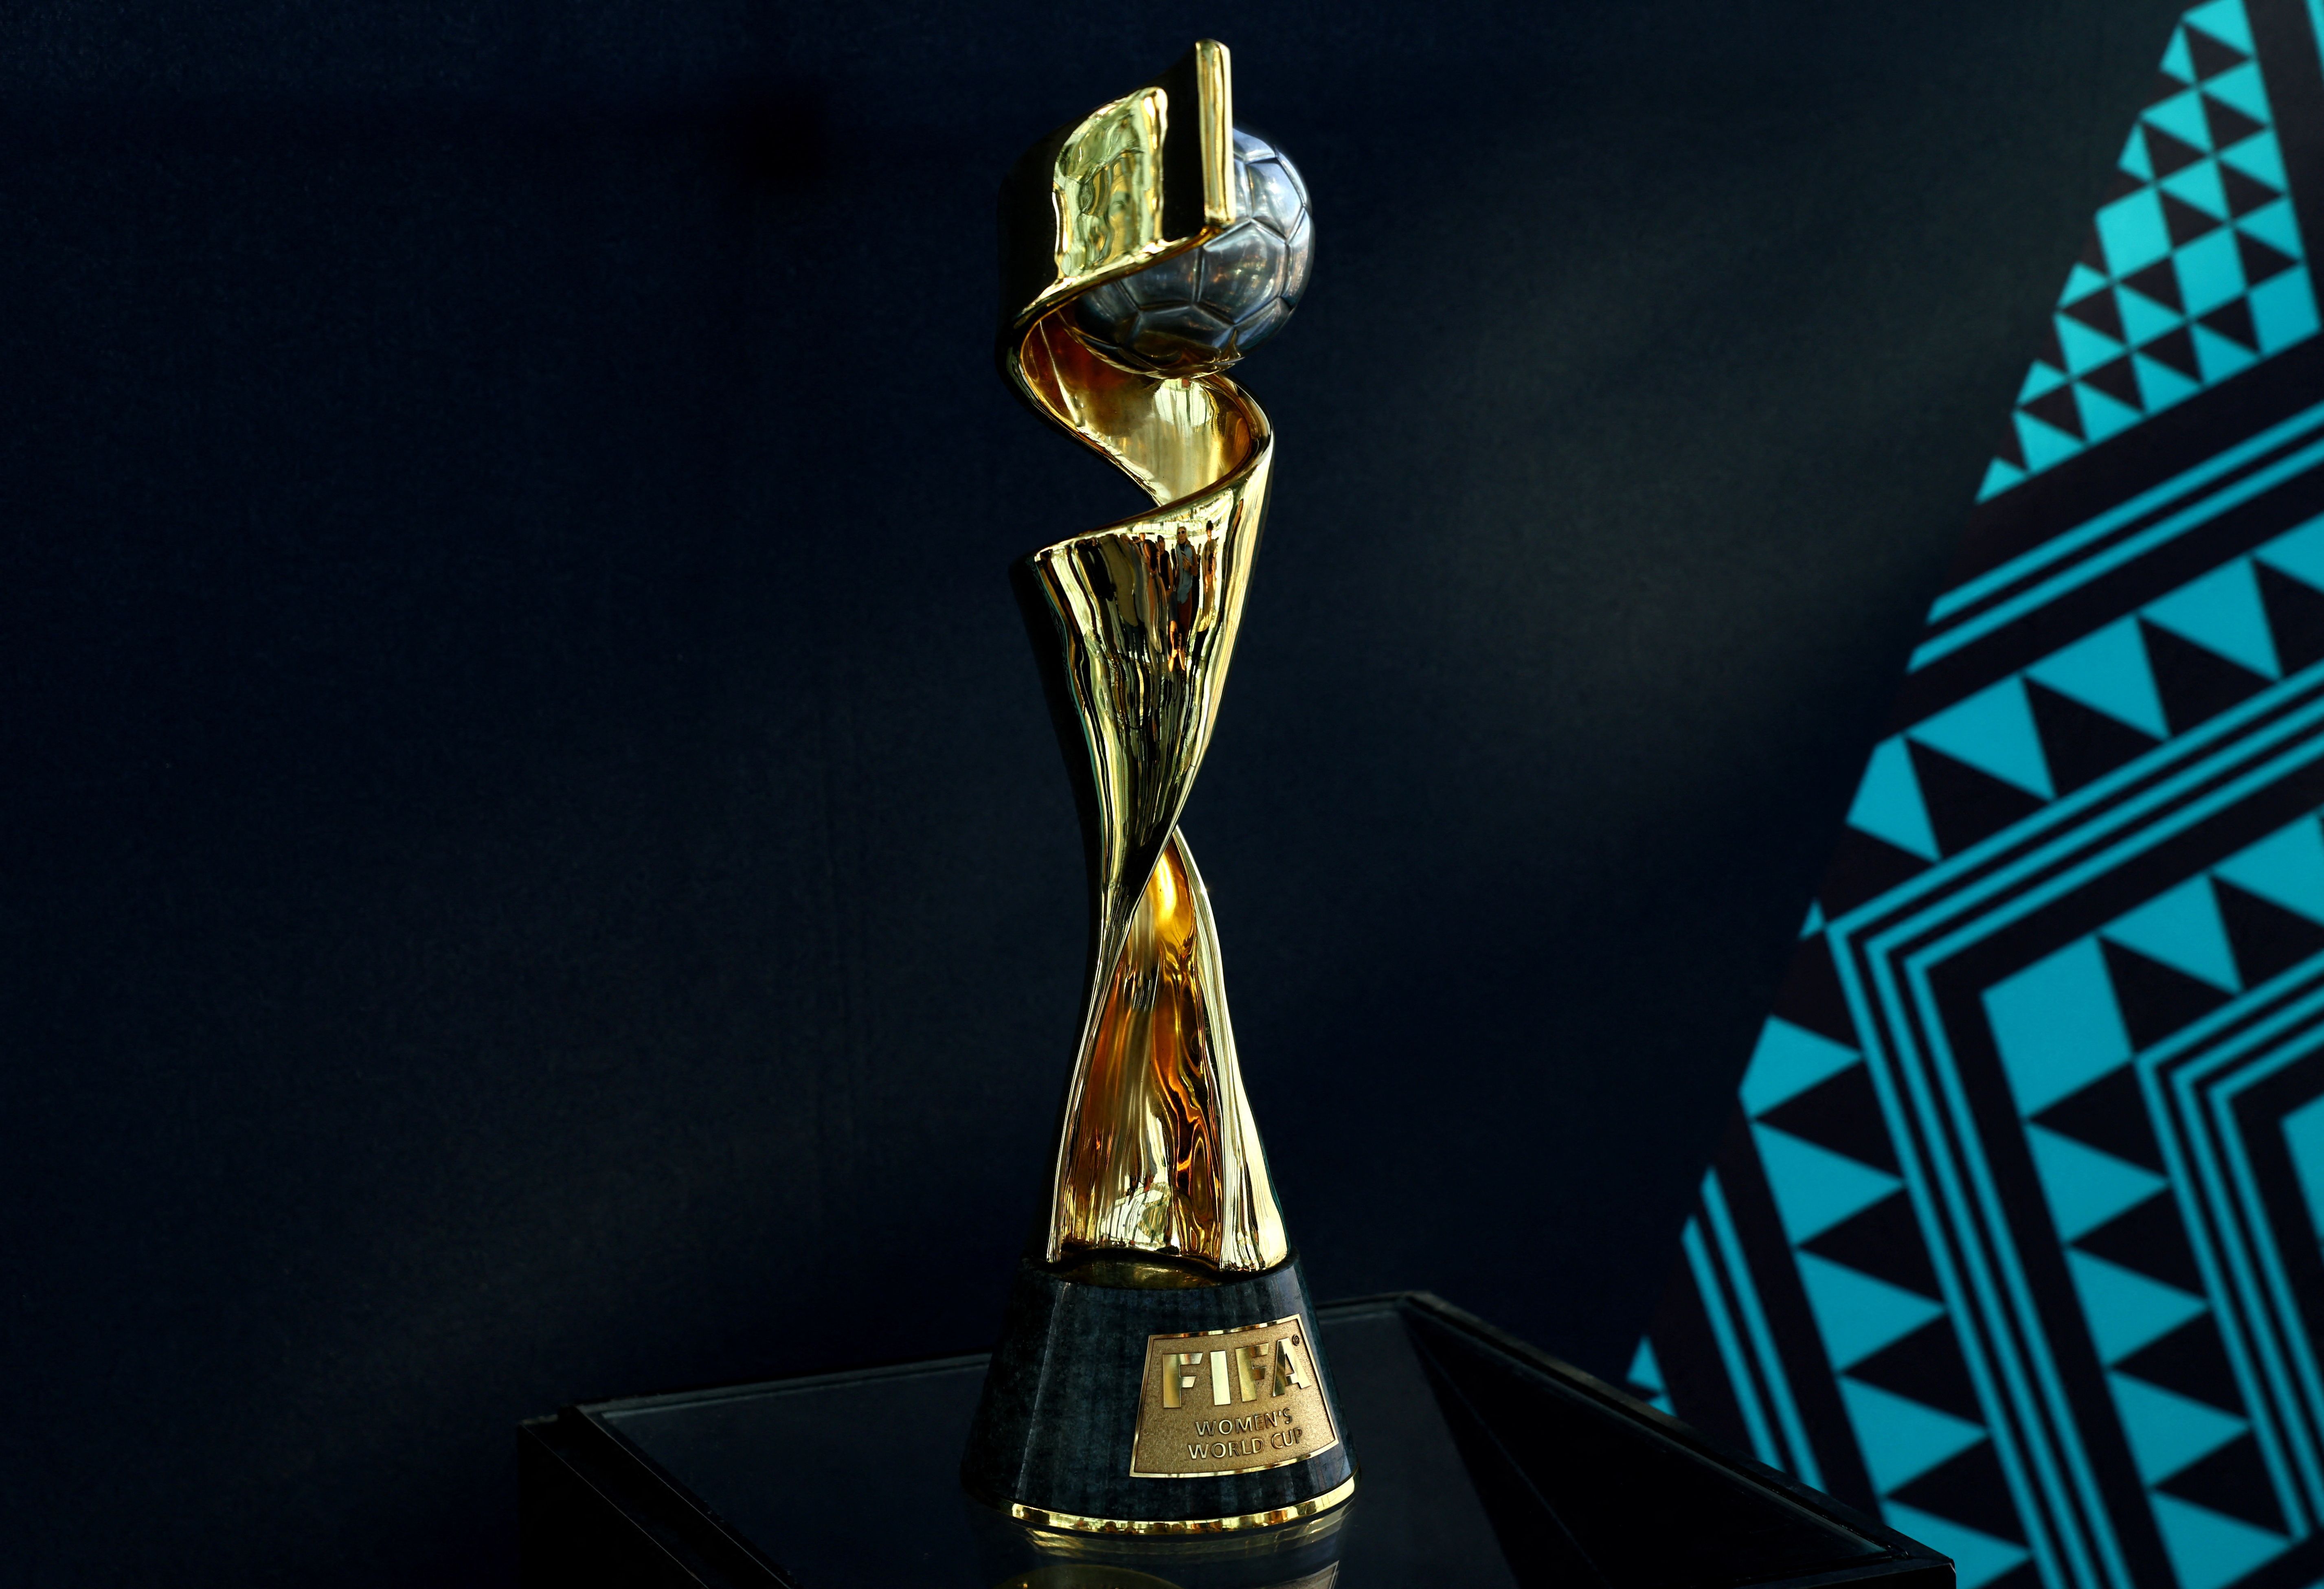 Women’s World Cup trophy in New York